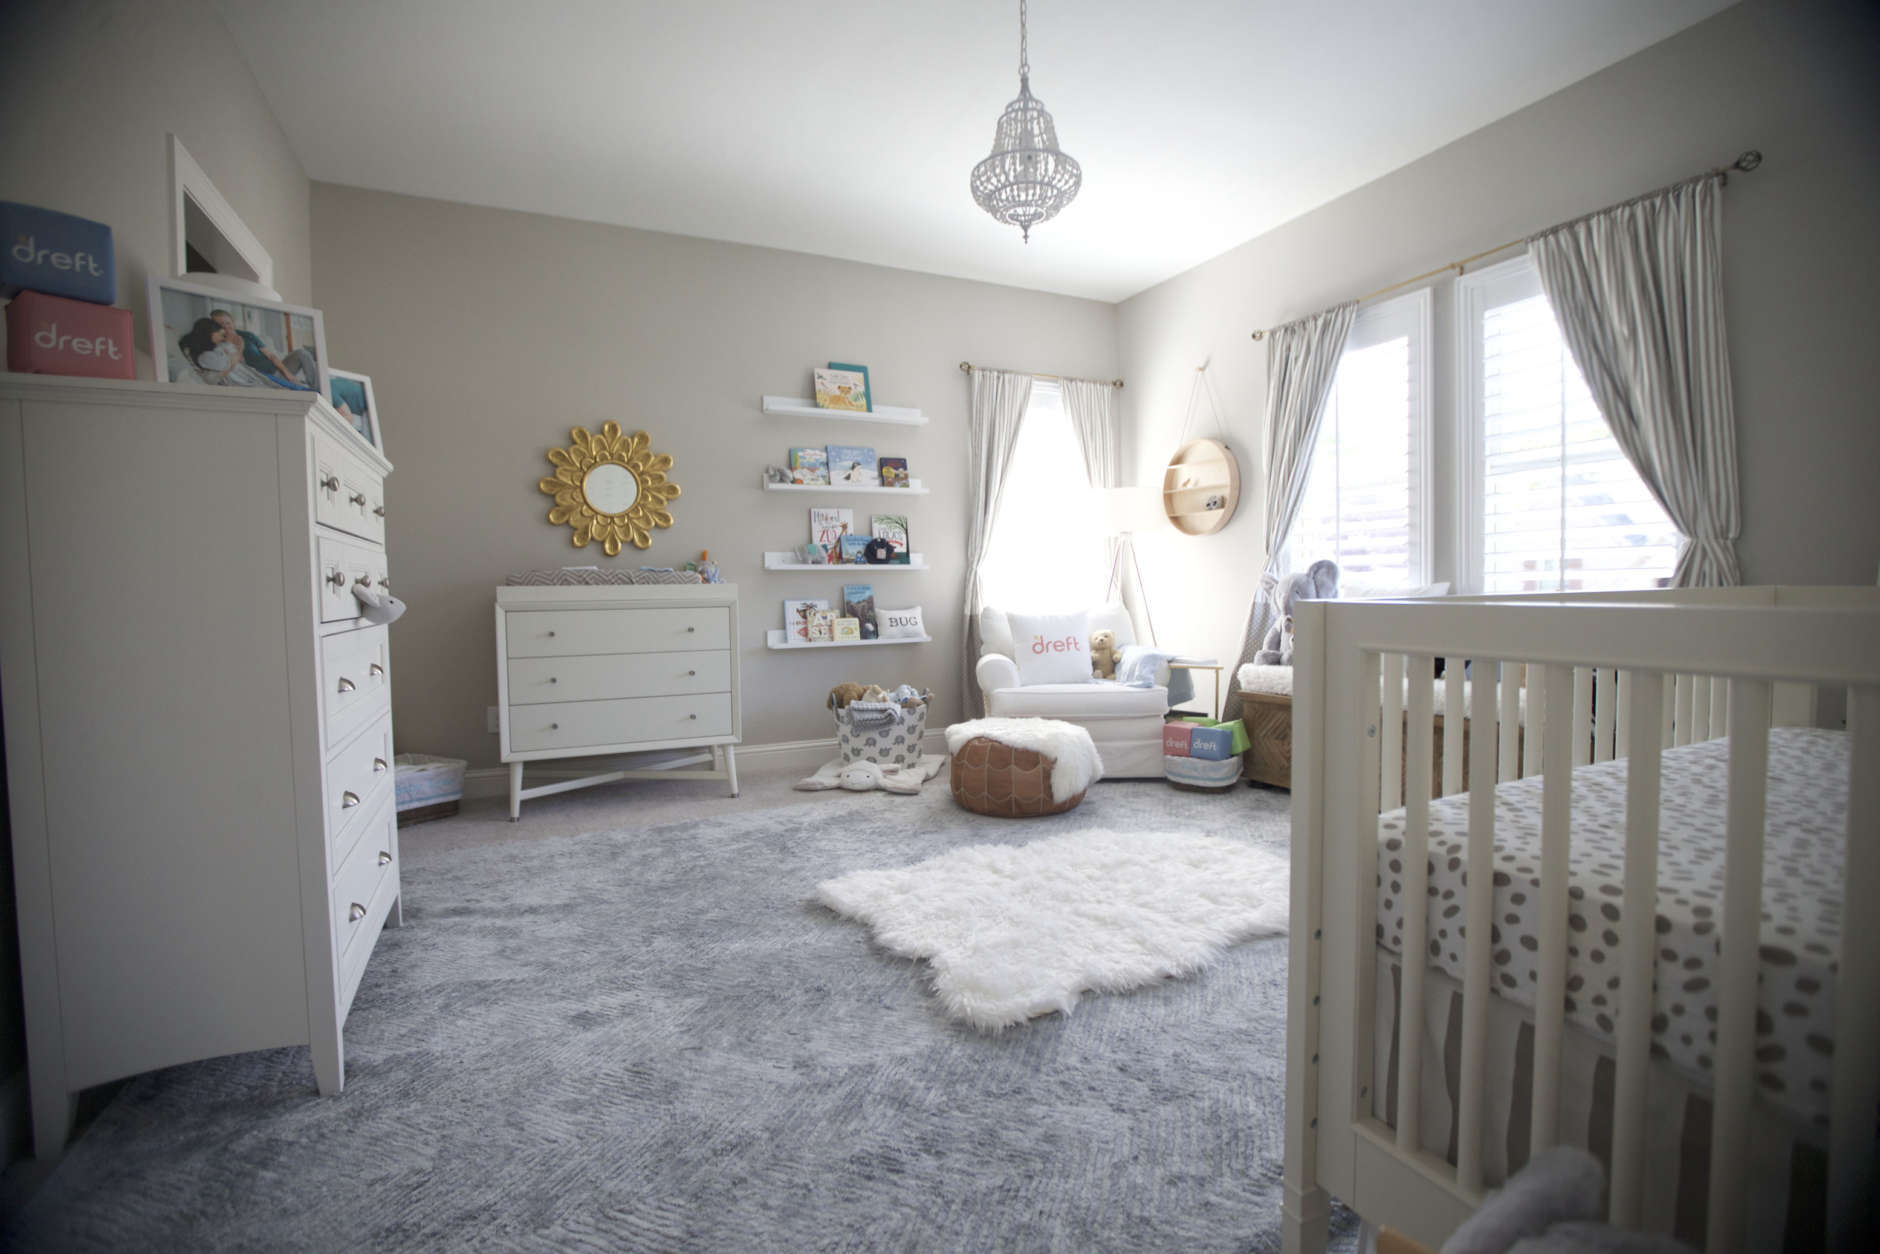 IMAGE DISTRIBUTED FOR DREFT - In this image released on Thursday, Aug. 25, 2016, popular reality TV couple and new parents Sean and Catherine Lowe revealed son Samuel's chic nursery at their new home in Dallas, Texas. The couple, who has partnered with Dreft, the No. 1 pediatrician and dermatologist recommended laundry detergent brand for baby's clothes, will be sharing exclusive content and messy memories from their first year of parenthood on @Dreft's social channels. Visit Dreft.com or follow @Dreft on Facebook, Twitter and Instagram for more information. (Brandon Wade/AP Images for Dreft)